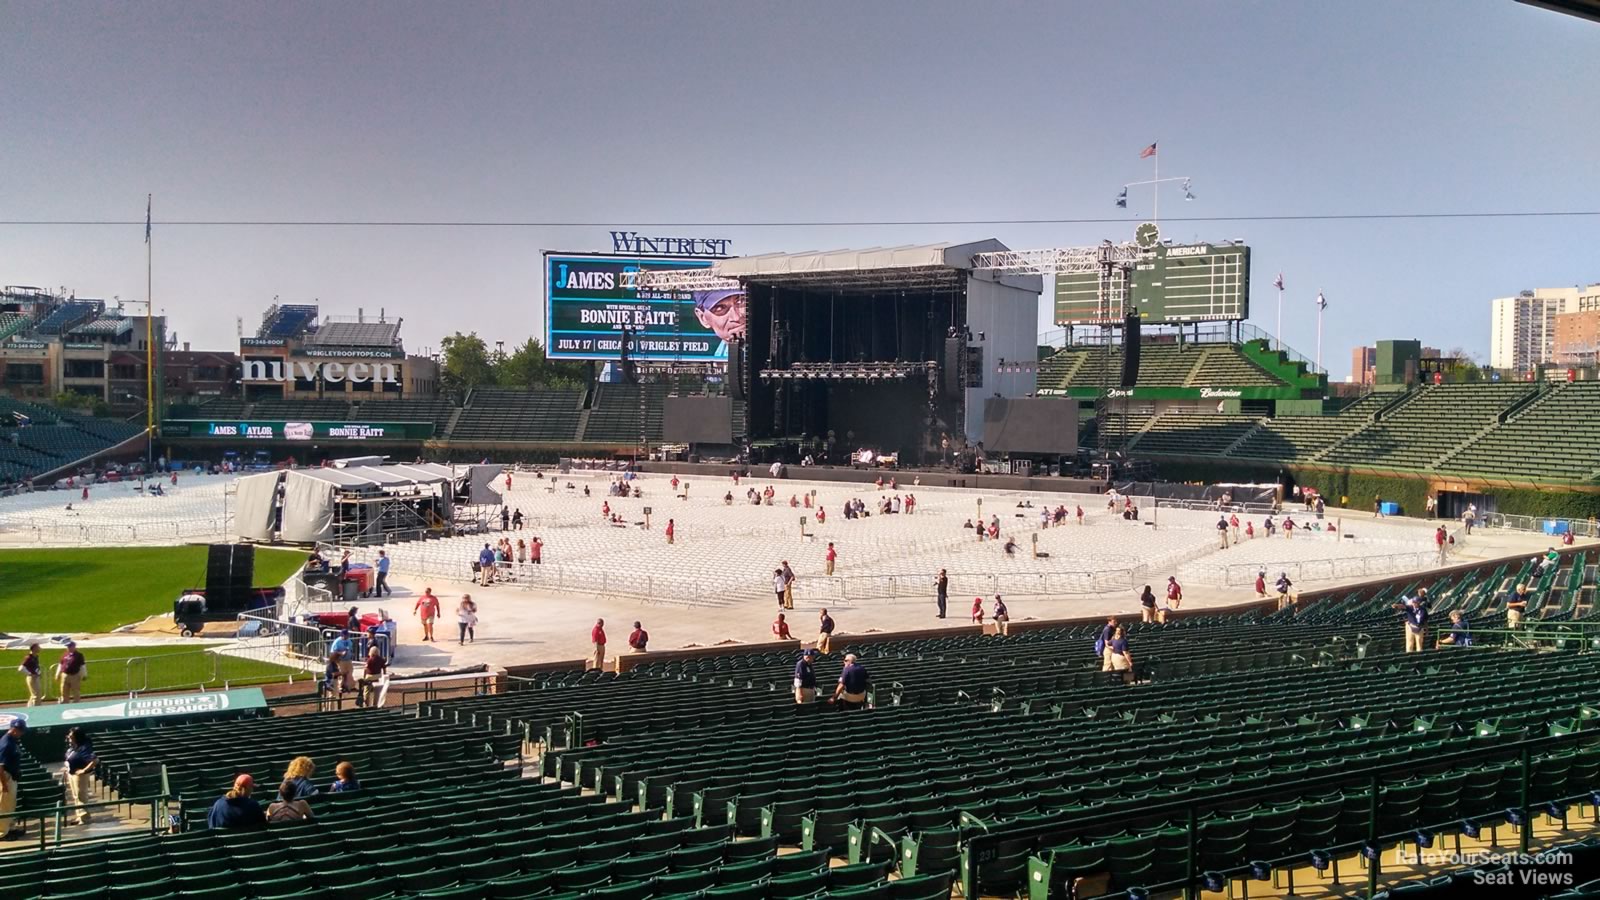 section 225, row 7 seat view  for concert - wrigley field